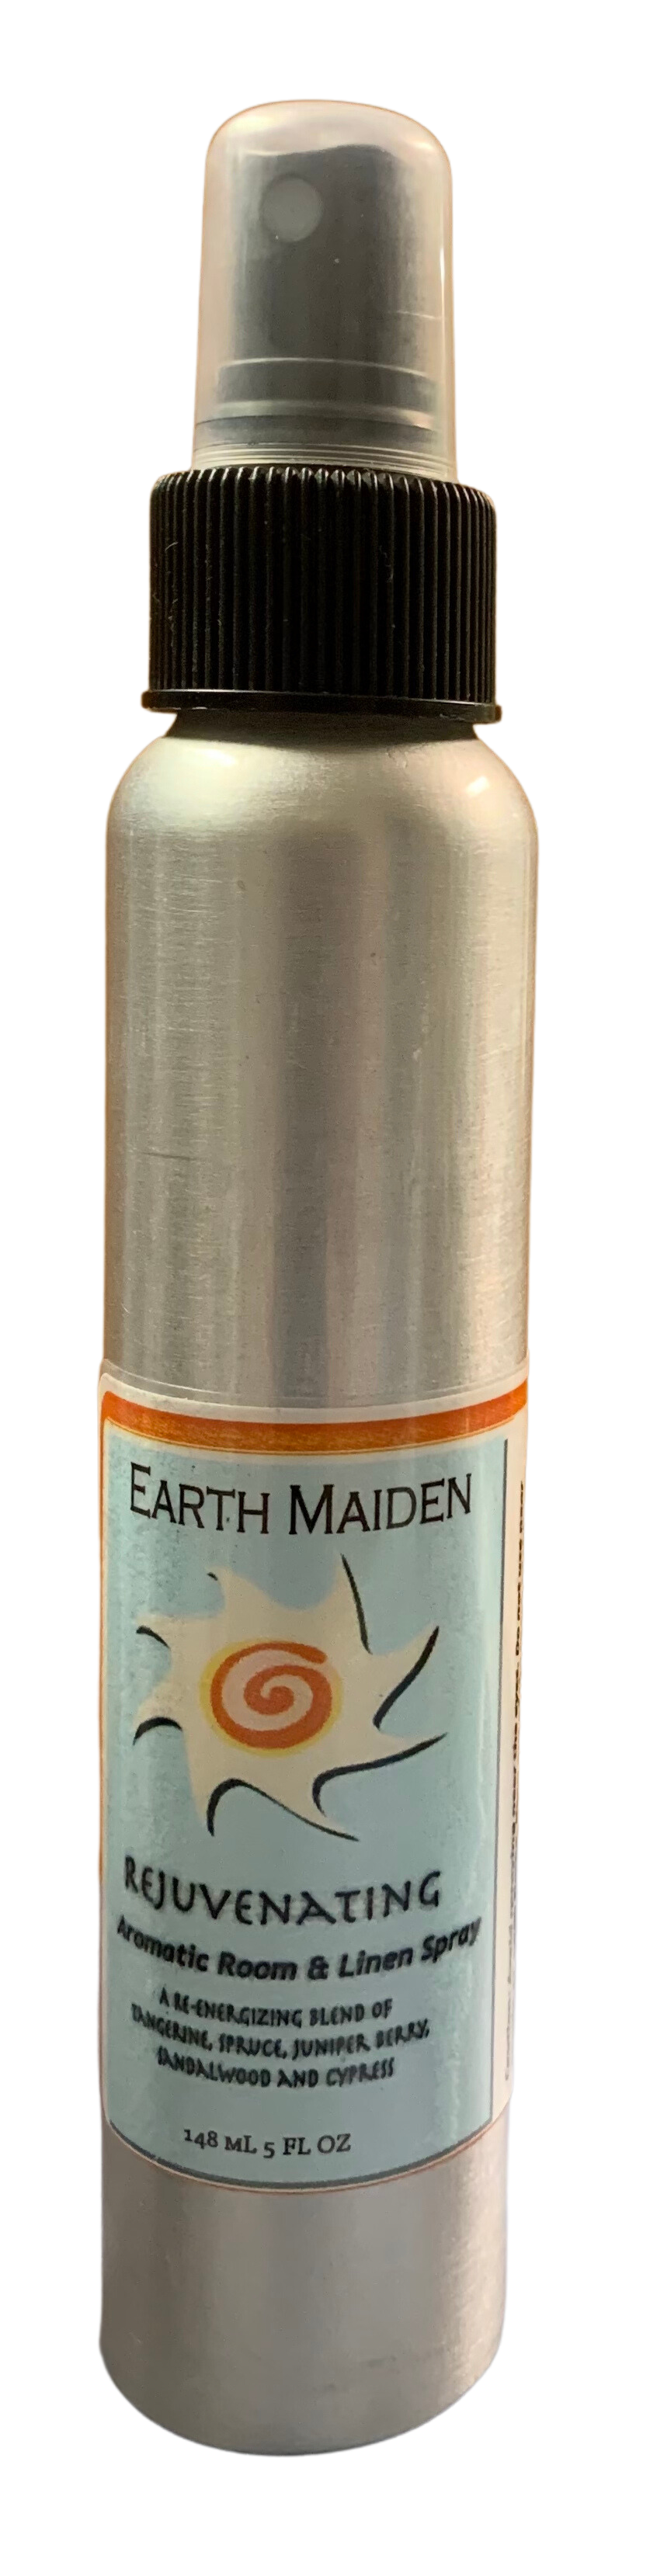 All Natural “Rejuvenating” Aroma Mist with Tangerine, Spruce, Juniper Berry, Sandalwood, Cypress Essential Oils in 5-ounce metal bullet container with fine mist sprayer.